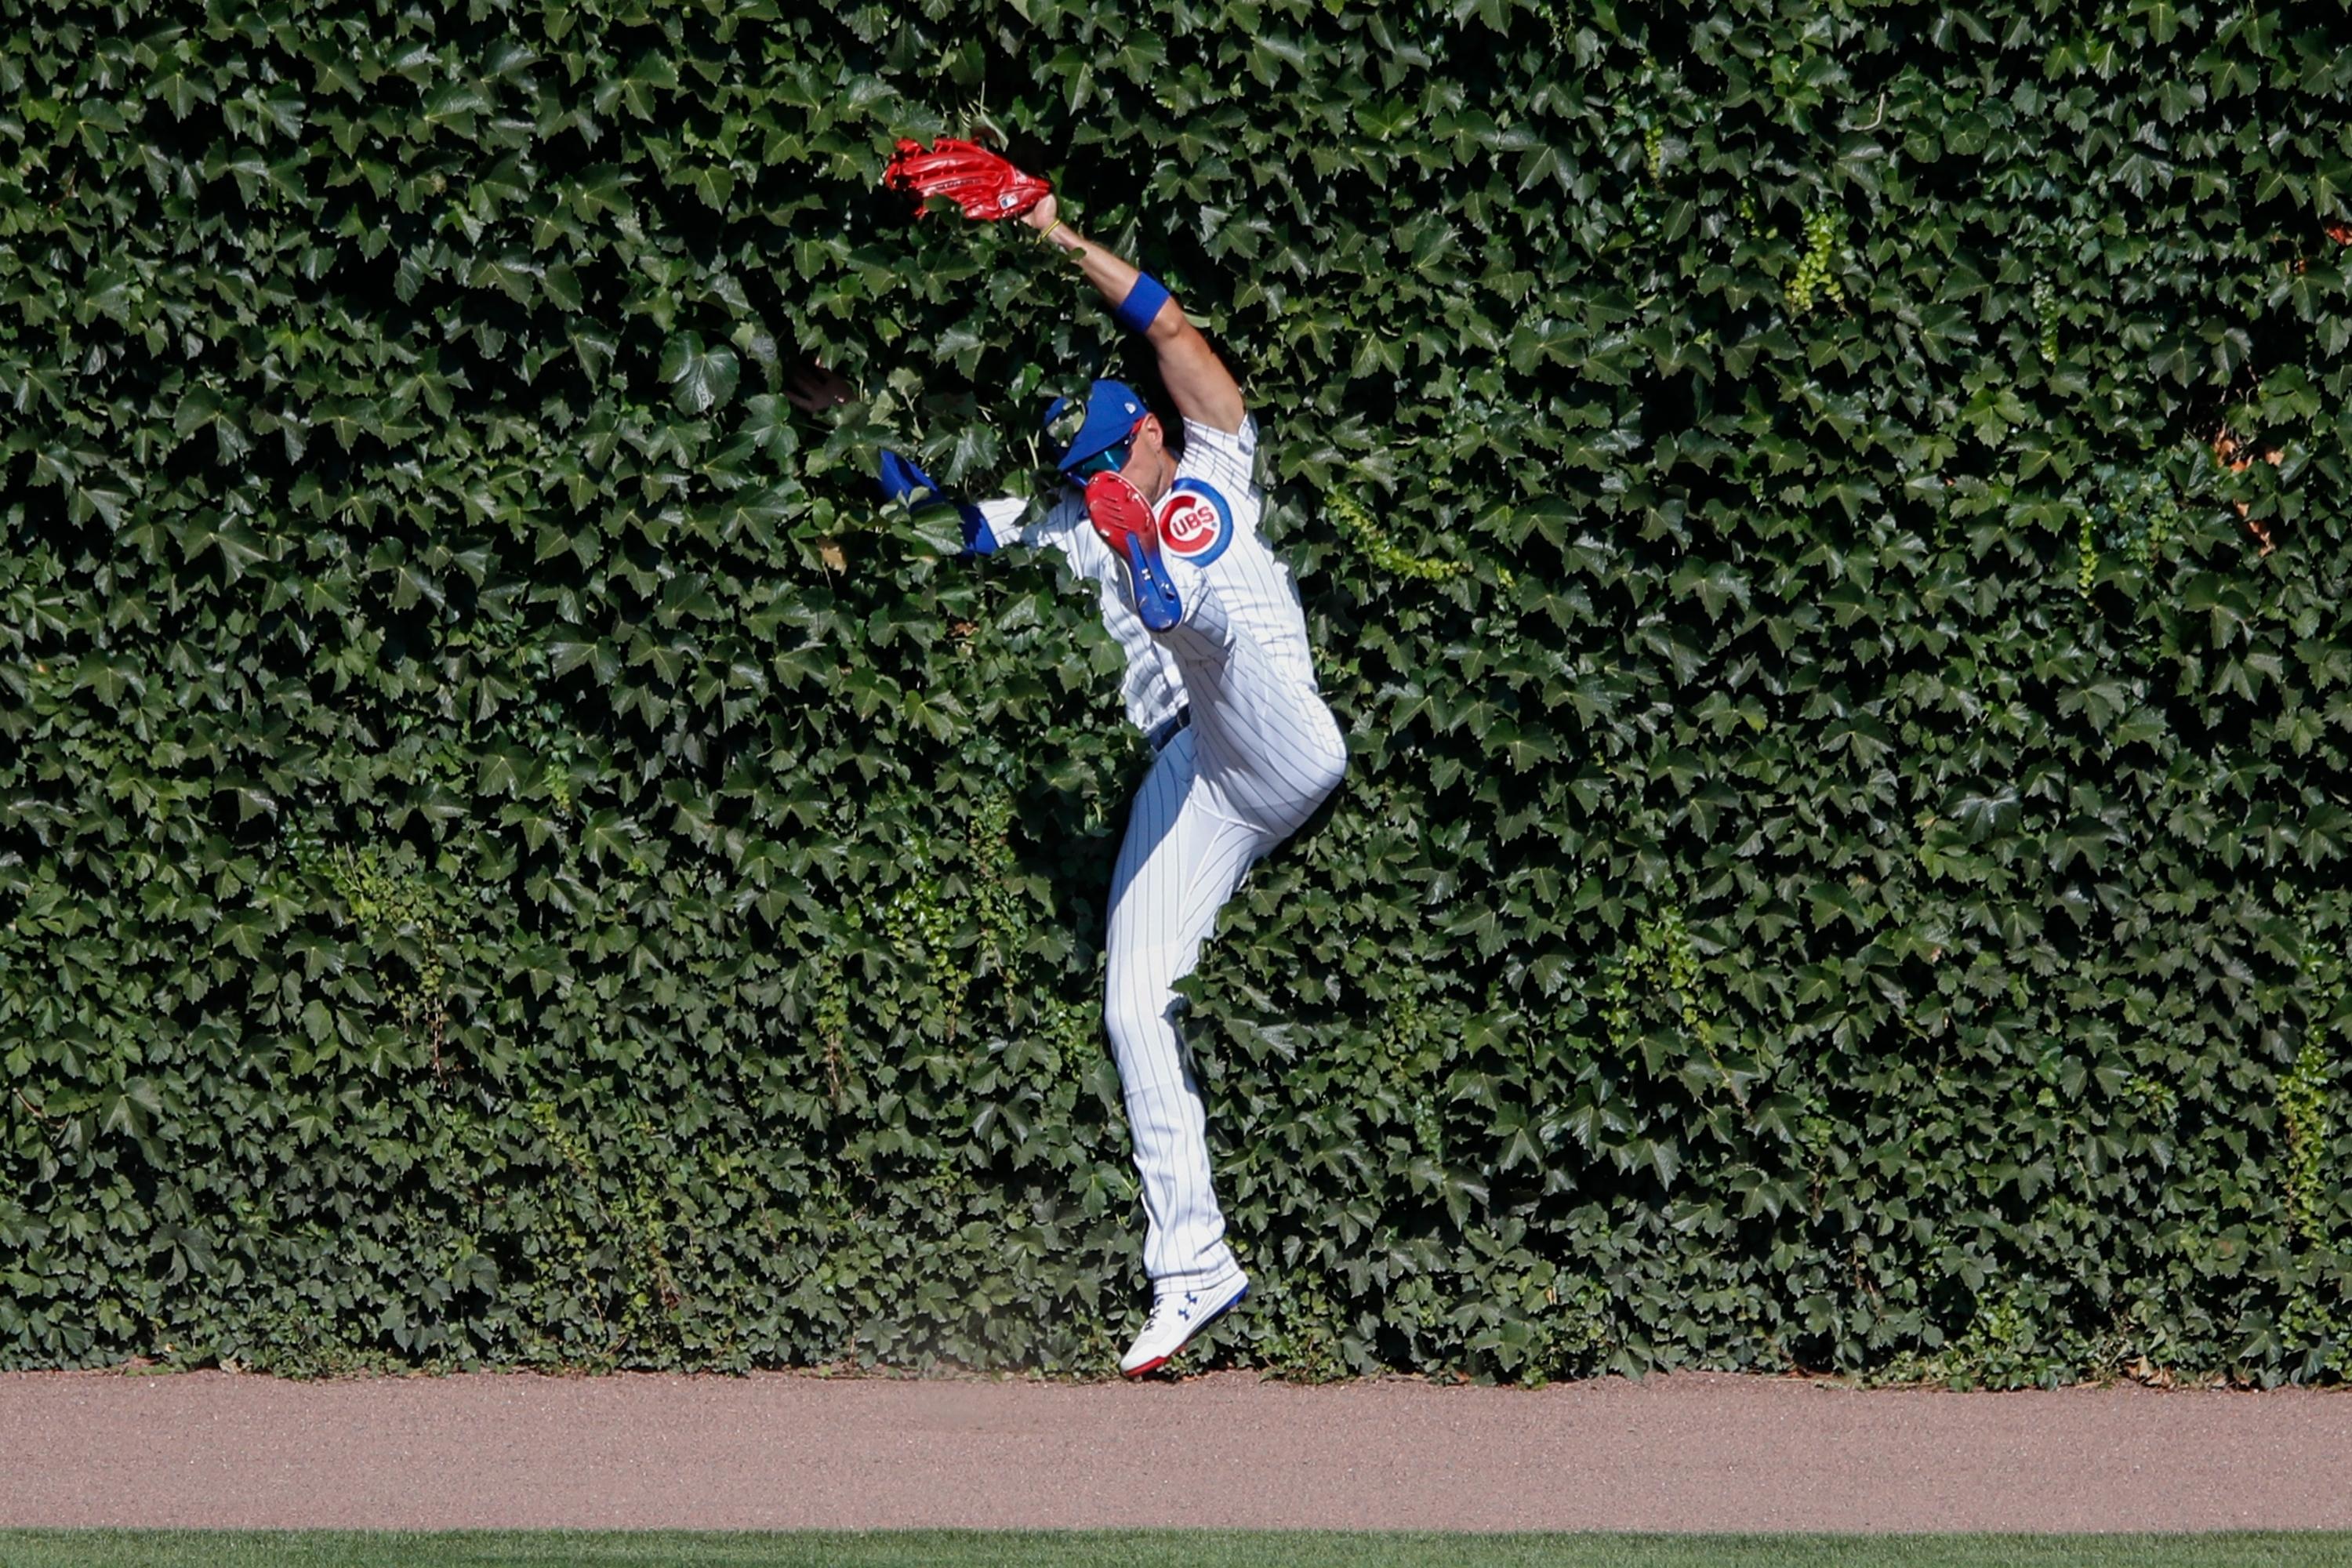 Jul 26, 2020; Chicago, Illinois, USA; Chicago Cubs center fielder Albert Almora Jr. (5) catches a fly ball hit by Milwaukee Brewers first baseman Logan Morrison (not pictured) during the ninth inning at Wrigley Field. / Kamil Krzaczynski-USA TODAY Sports